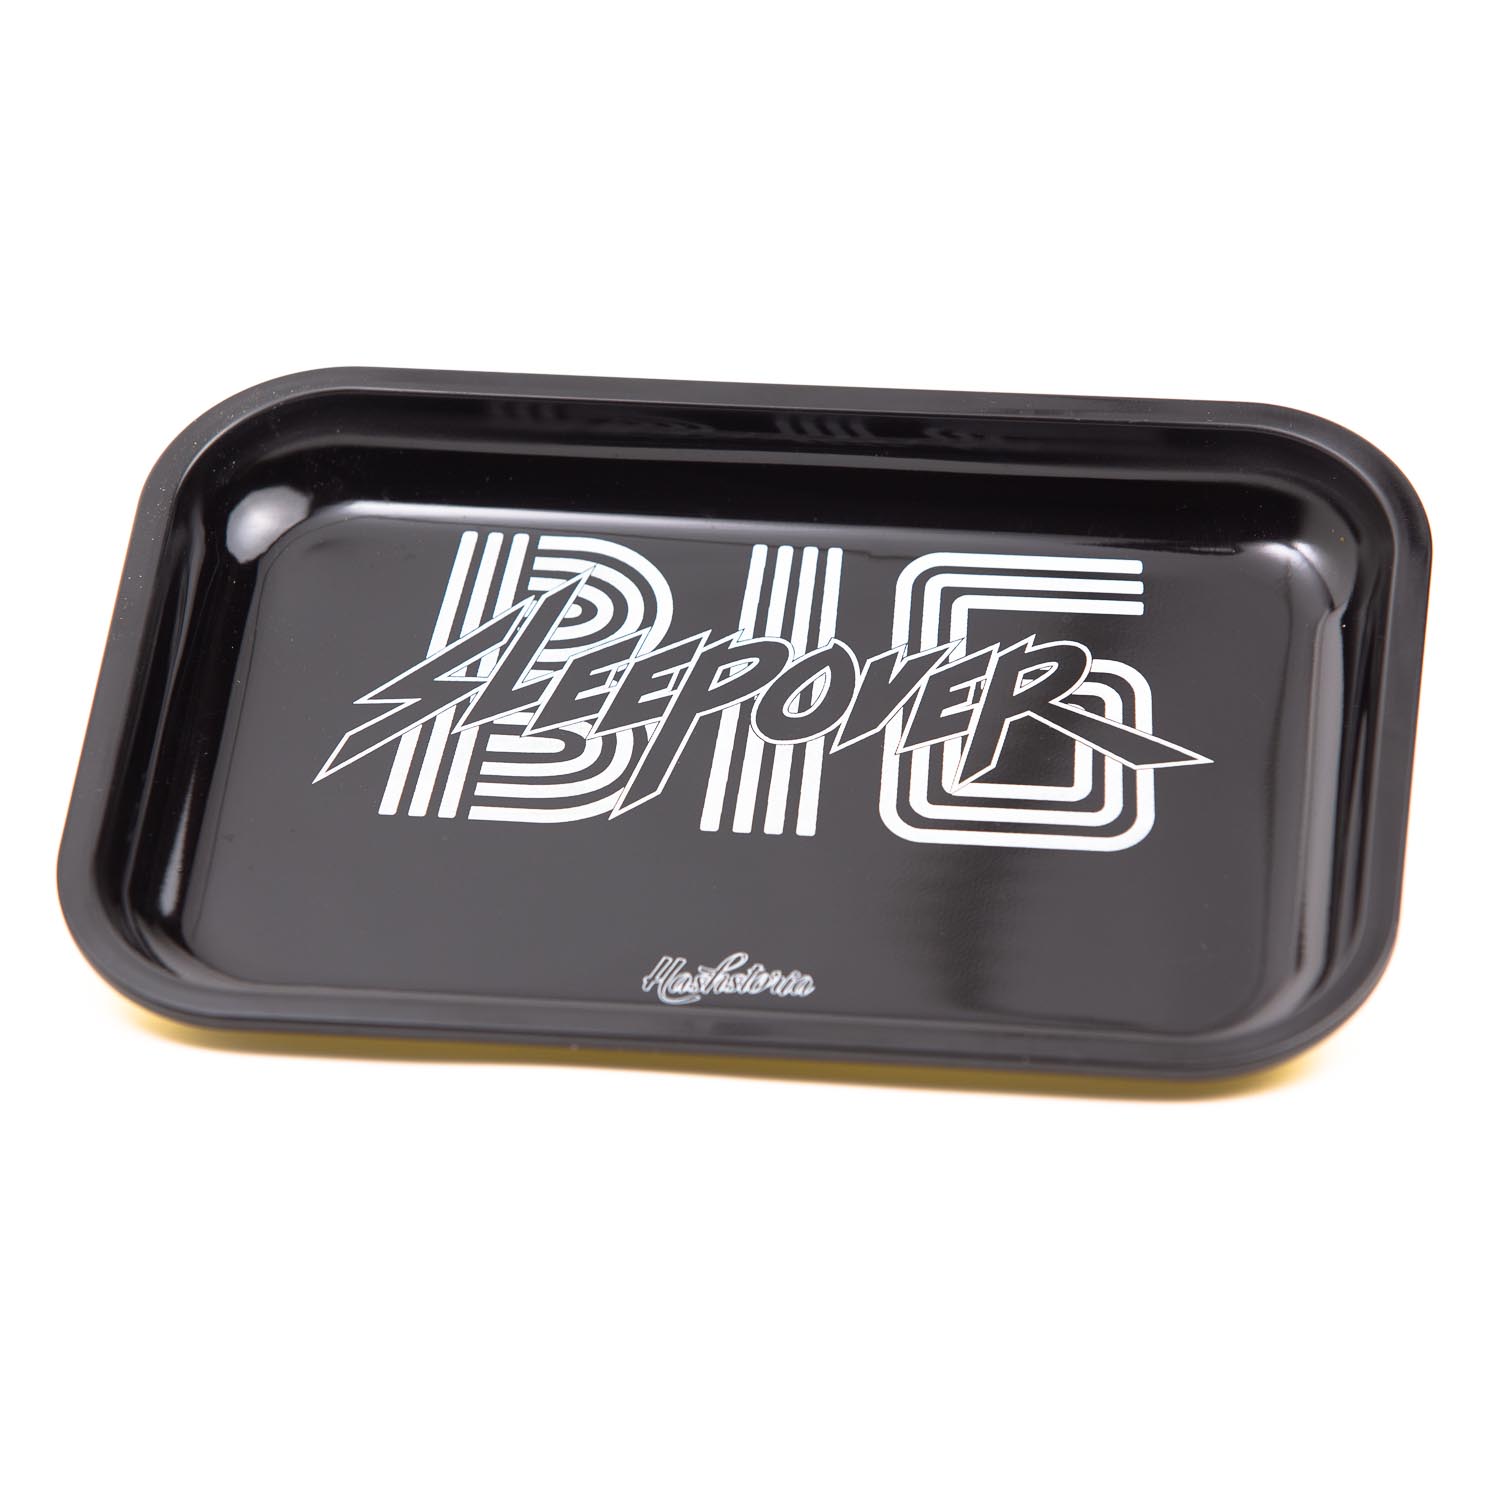 Rolling Trays for Beginners 